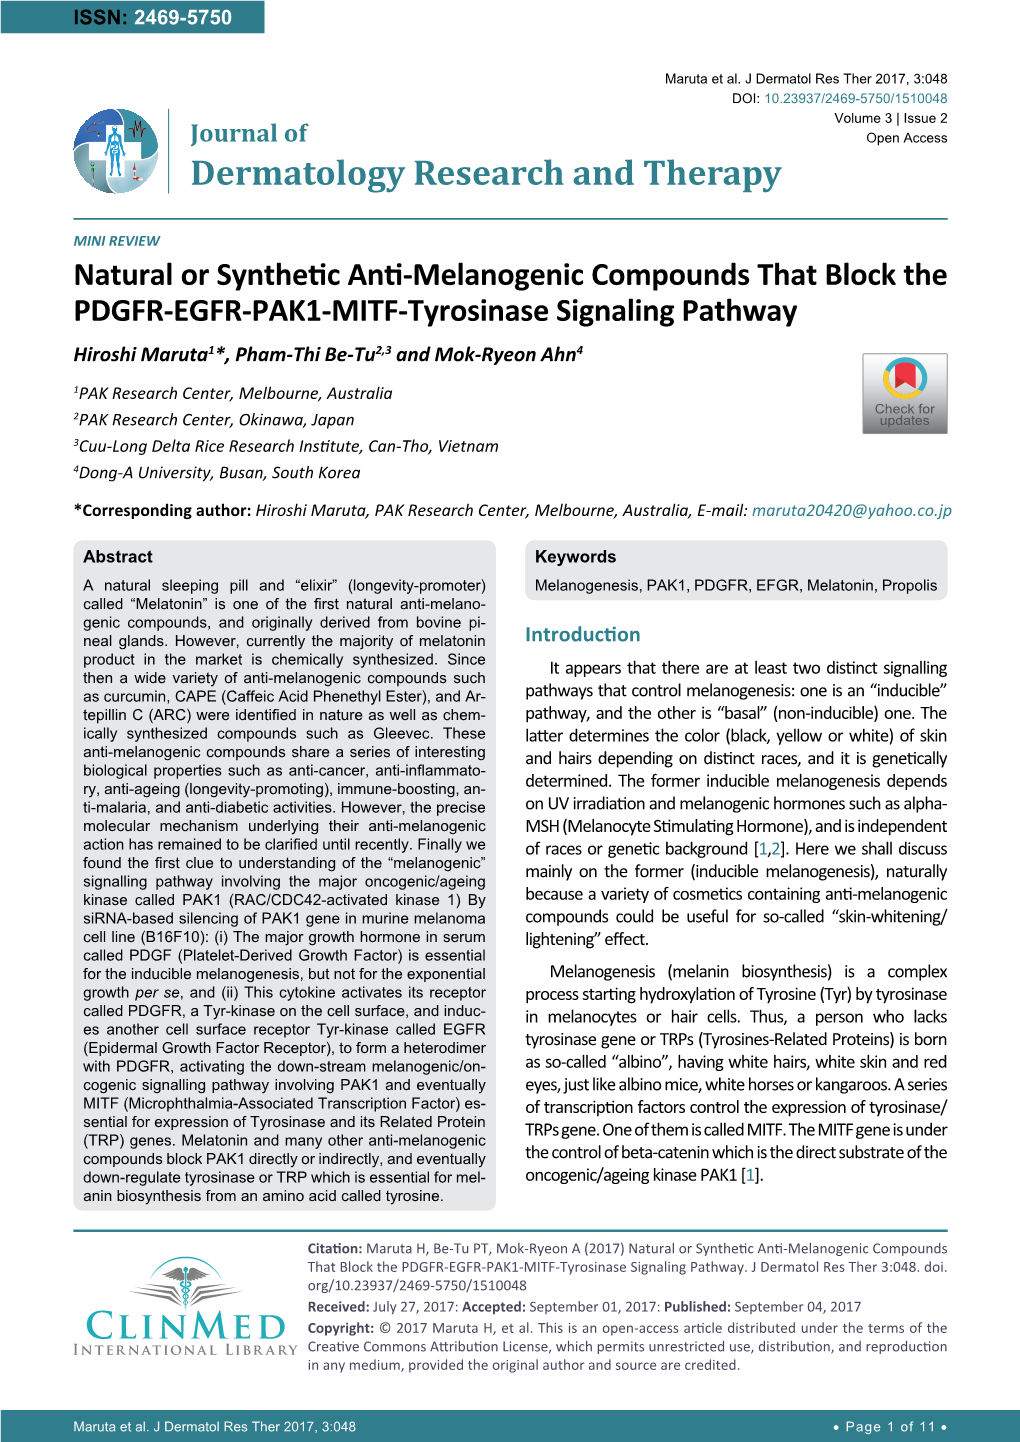 Natural Or Synthetic Anti-Melanogenic Compounds That Block the PDGFR